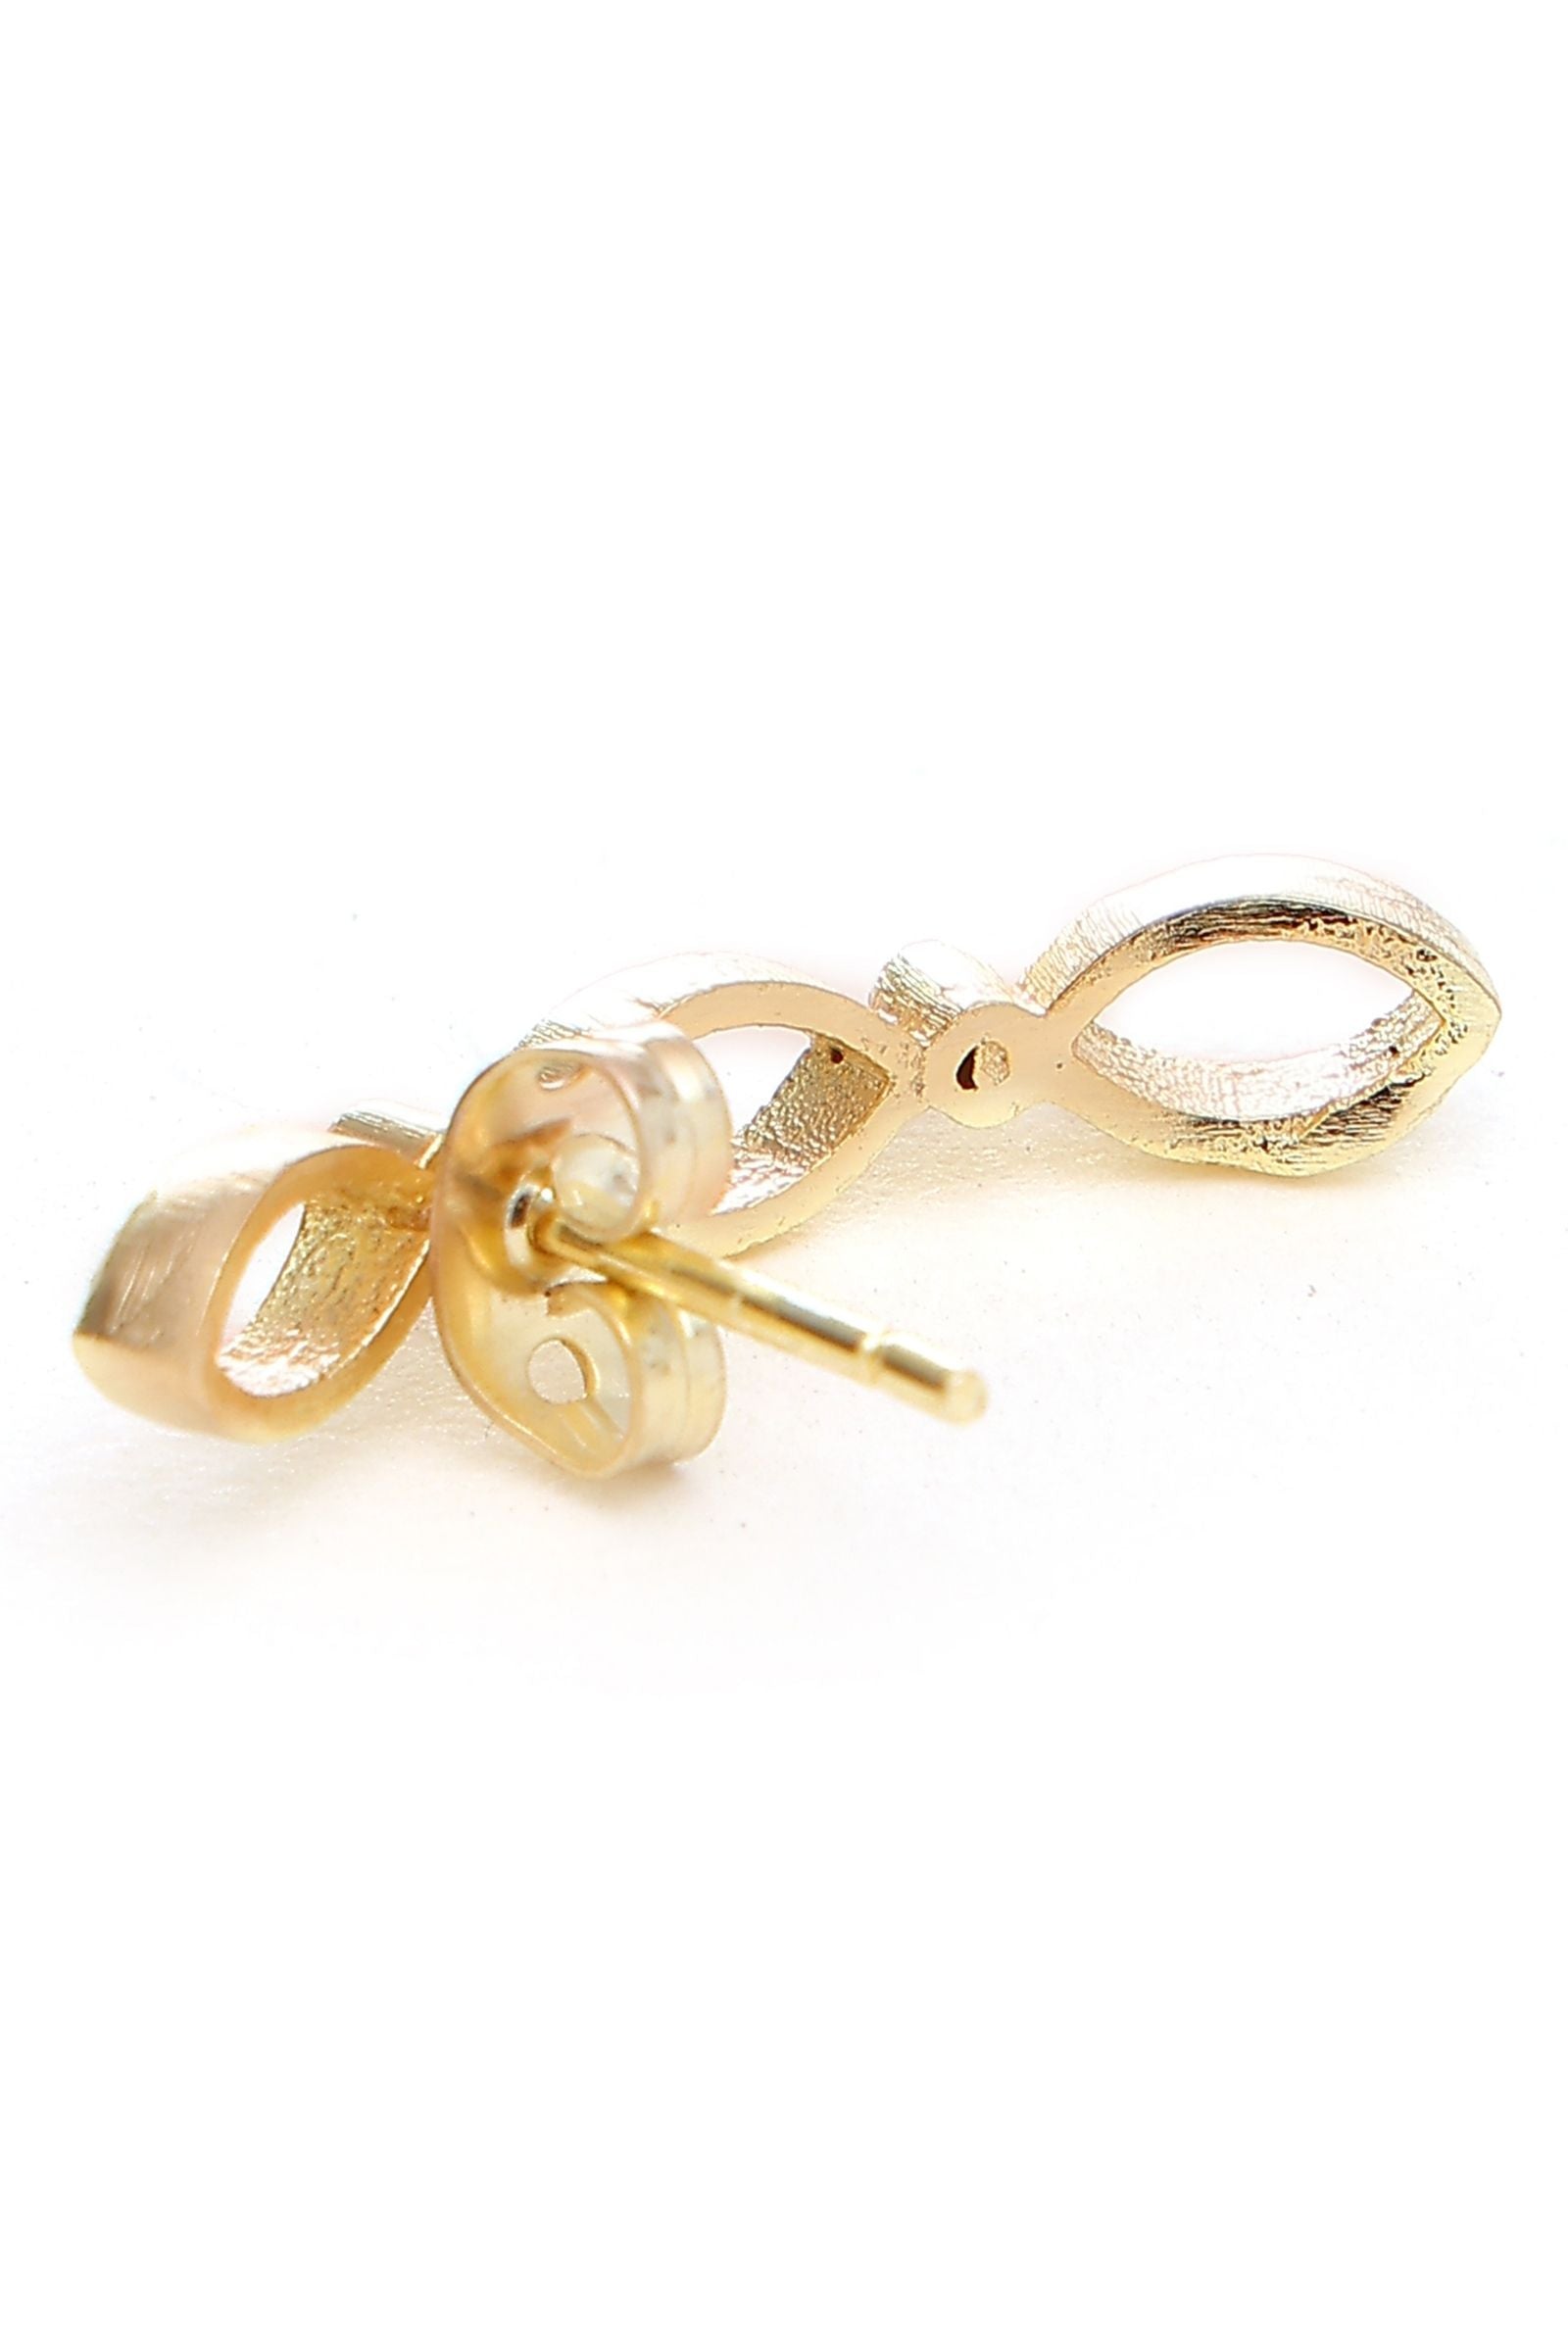 Gold Piacsso Climber Stud Earrings